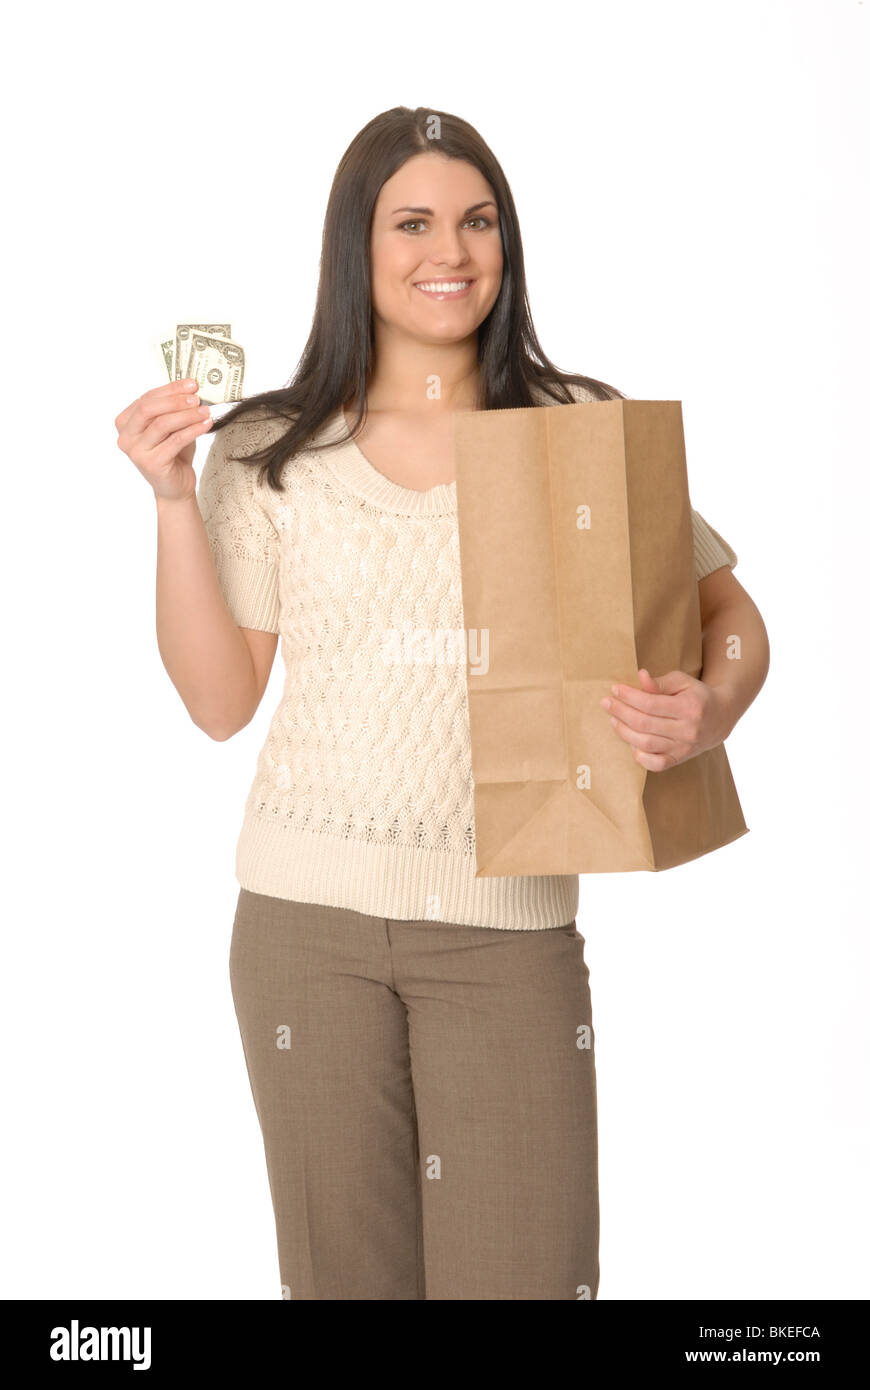 Attractive woman with a brown paper shopping bag and money. Stock Photo